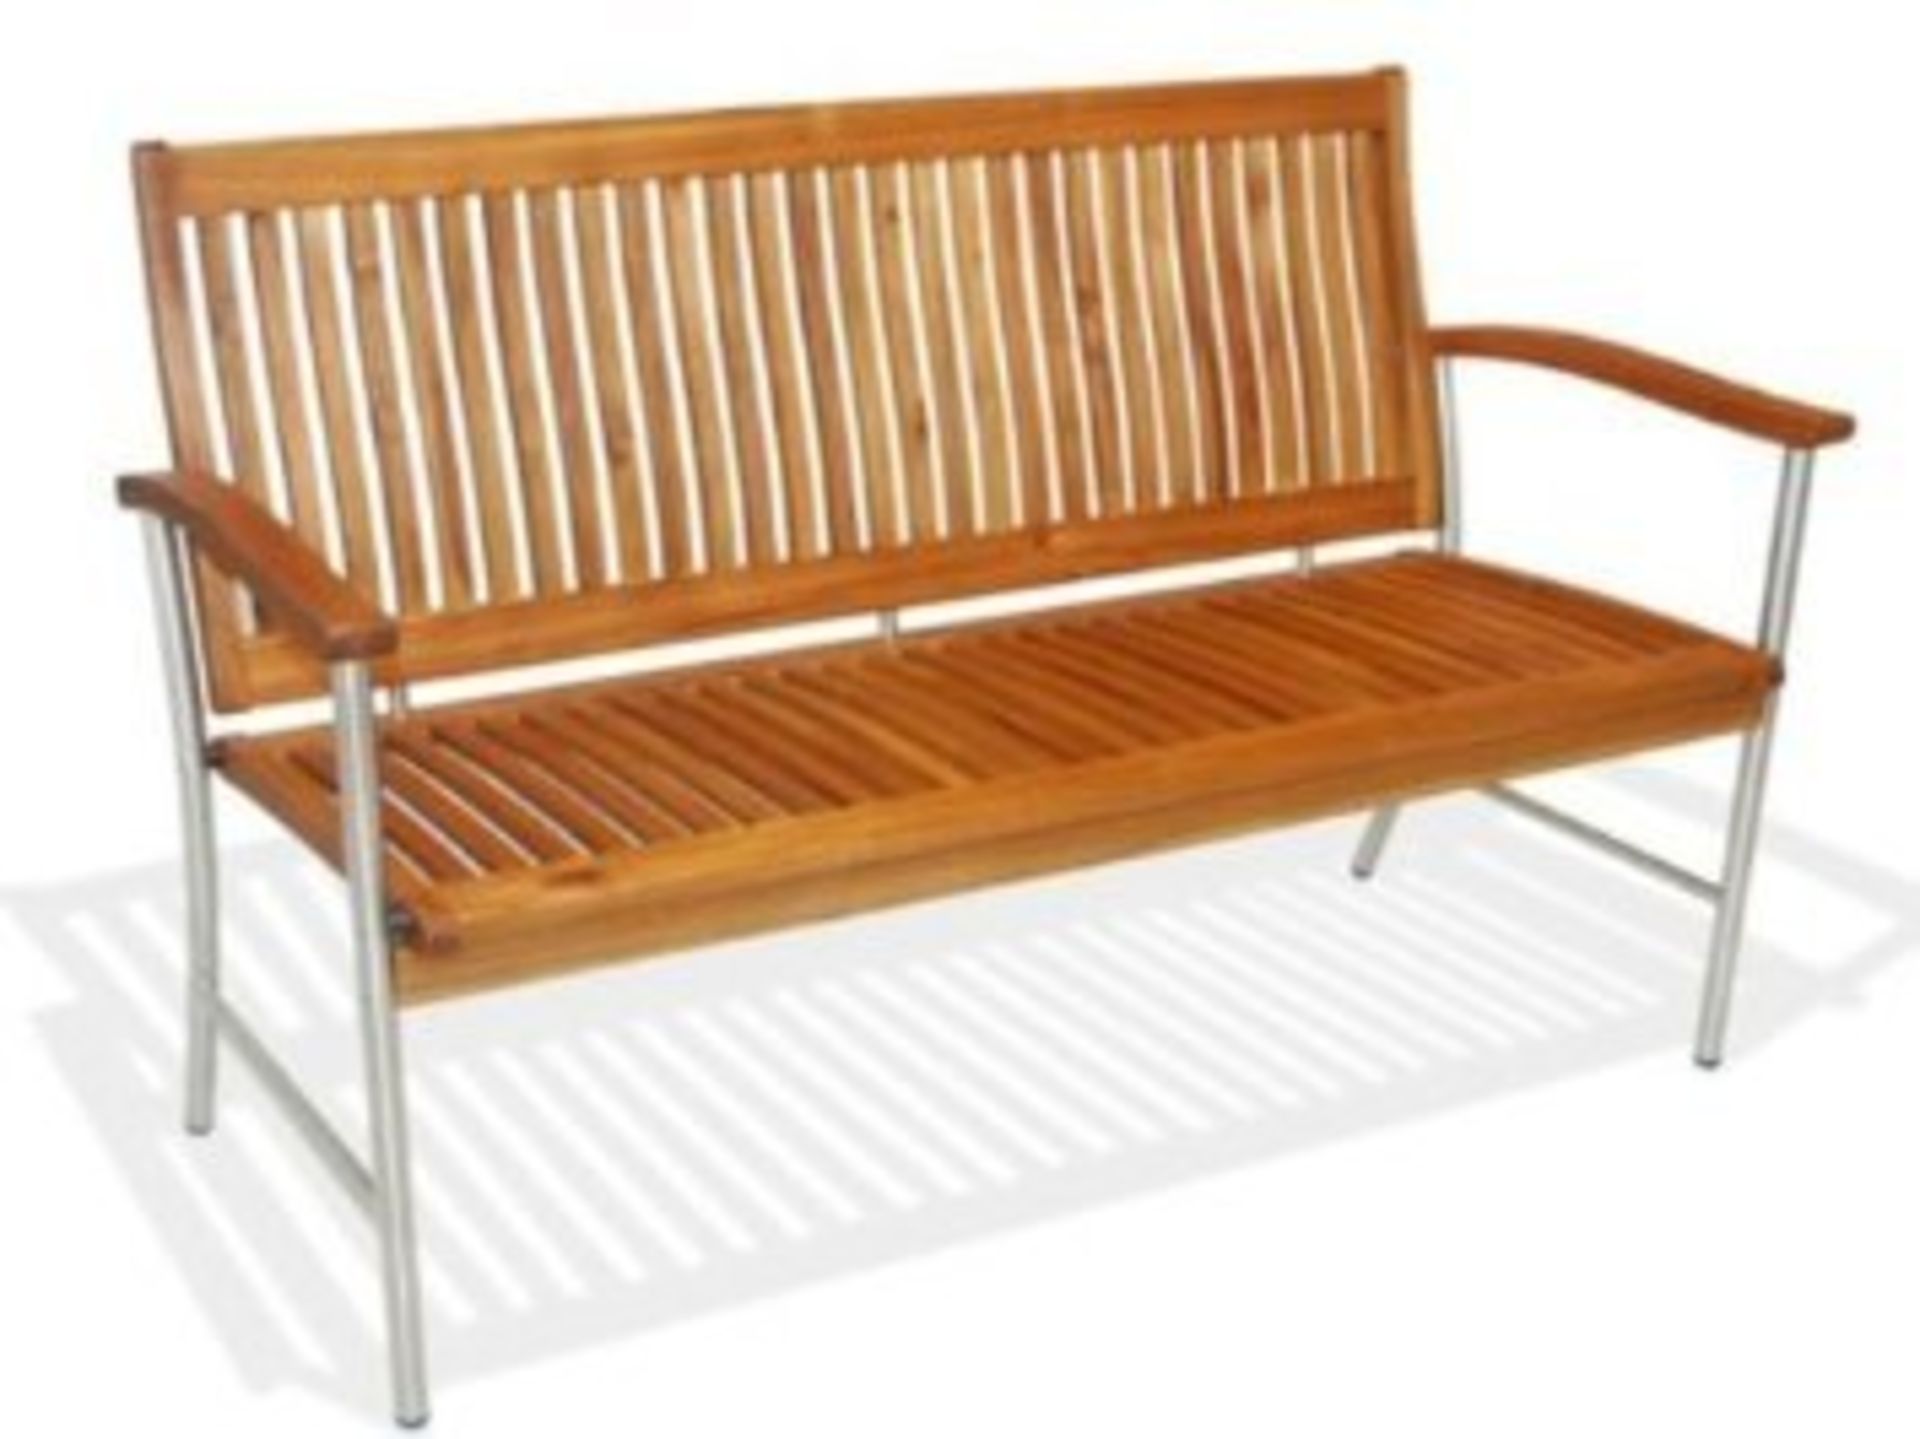 V Brand New Langkawi 2 Seater Bench With Stainless Steel Frame And Acacia Seat/Backrest/Arm Cover